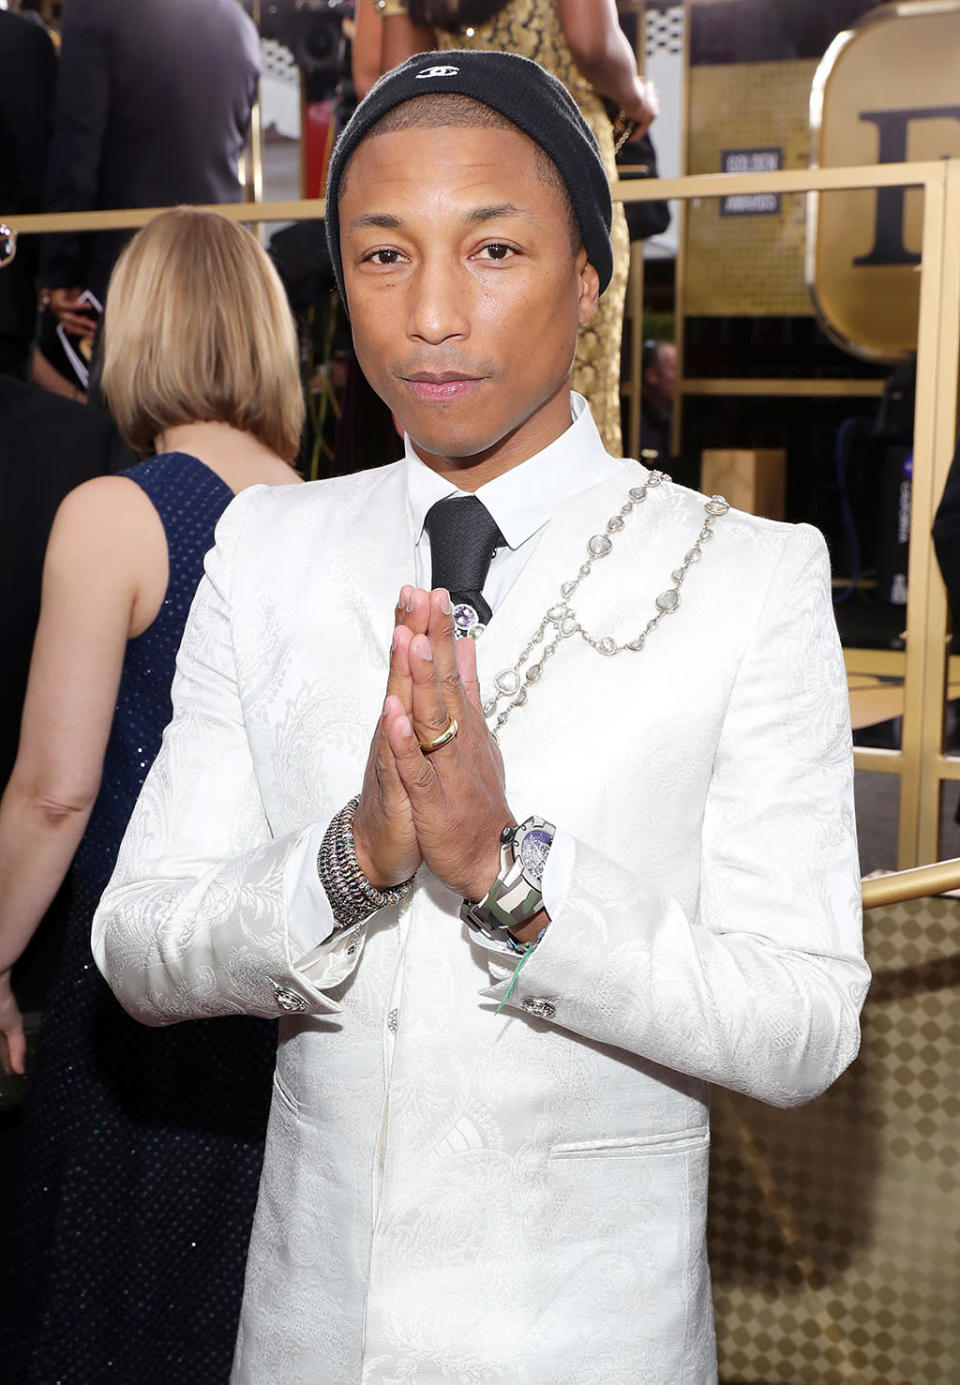 <p>Pharrell eschewed the standard black tux in favor of a cream-colored ensemble complete with a silver shoulder chain, which he completed with a Chanel beanie (because it’s what, 72 degrees in Los Angeles right now?). Somehow, because he’s Pharrell, he managed to pull it off. Jenna Bush might have been distracted by his snazzy outfit, though, since she mistakenly asked him about his (nonexistent) movie "Hidden Fences," instead of his very real movie, <i>Hidden Figures</i>. Oops! (Photo: Neilson Barnard/NBCUniversal/NBCU Photo Bank via Getty Images) </p>